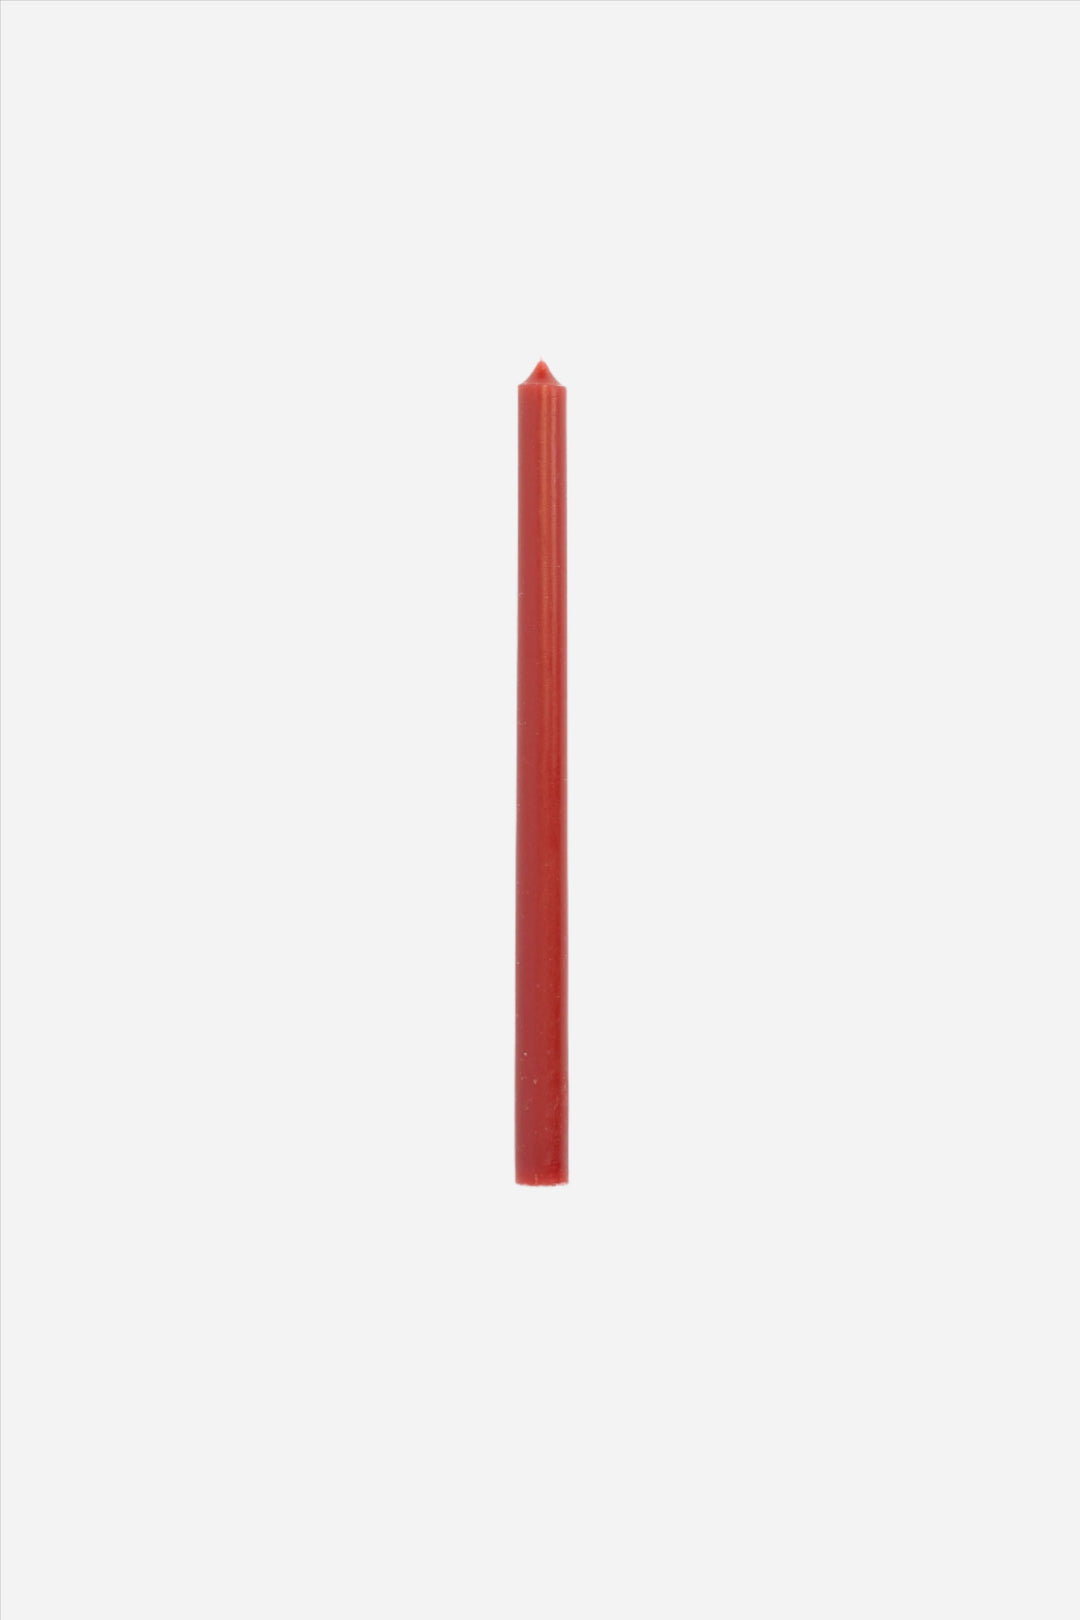 Slim Taper Candle / Red